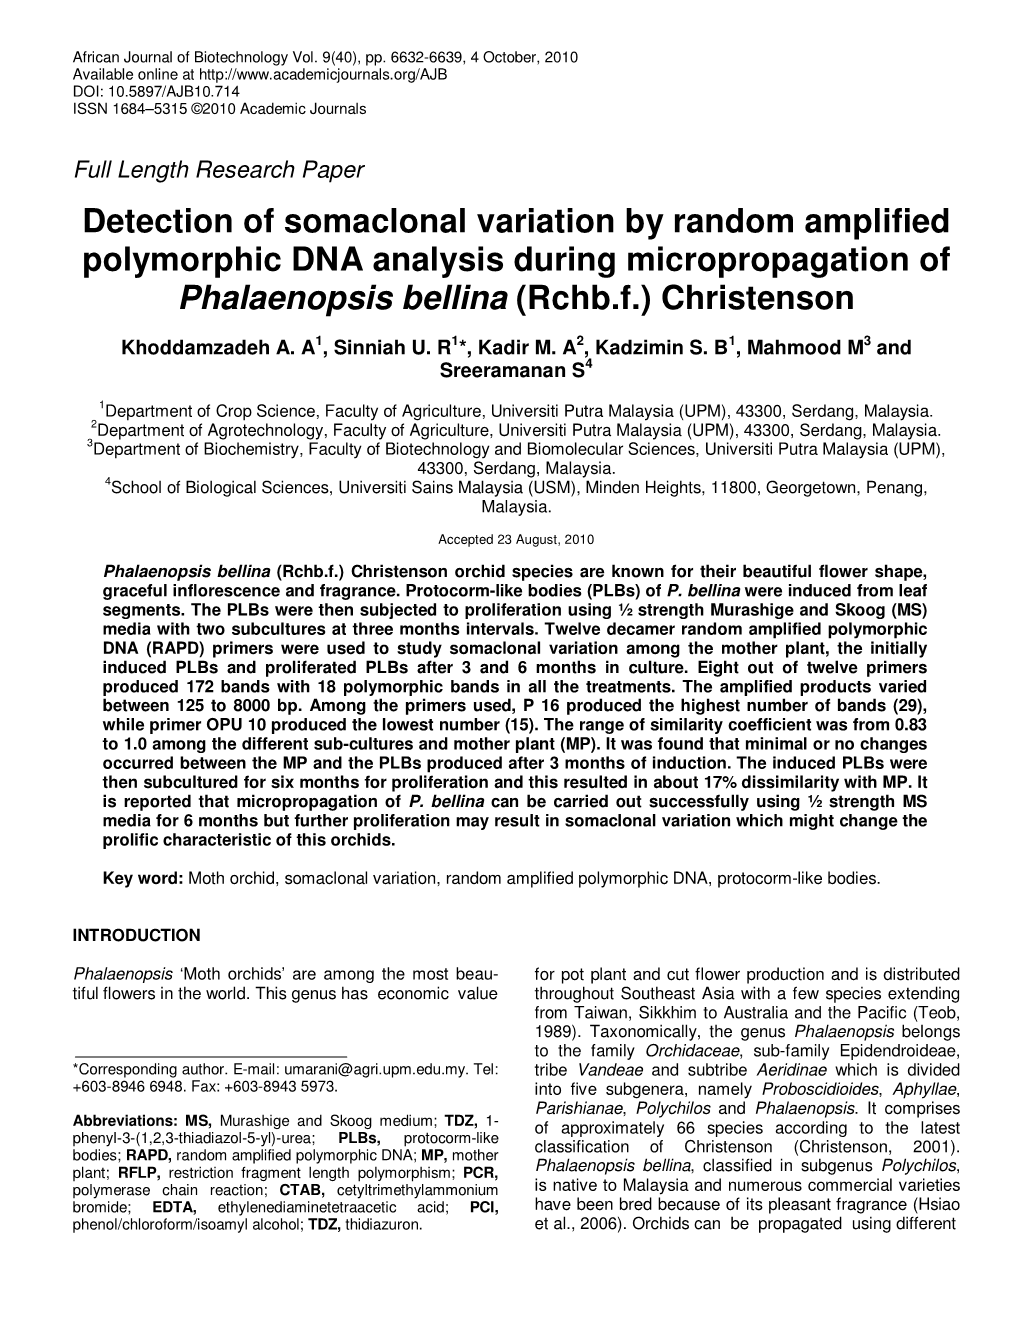 Detection of Somaclonal Variation by Random Amplified Polymorphic DNA Analysis During Micropropagation of Phalaenopsis Bellina (Rchb.F.) Christenson